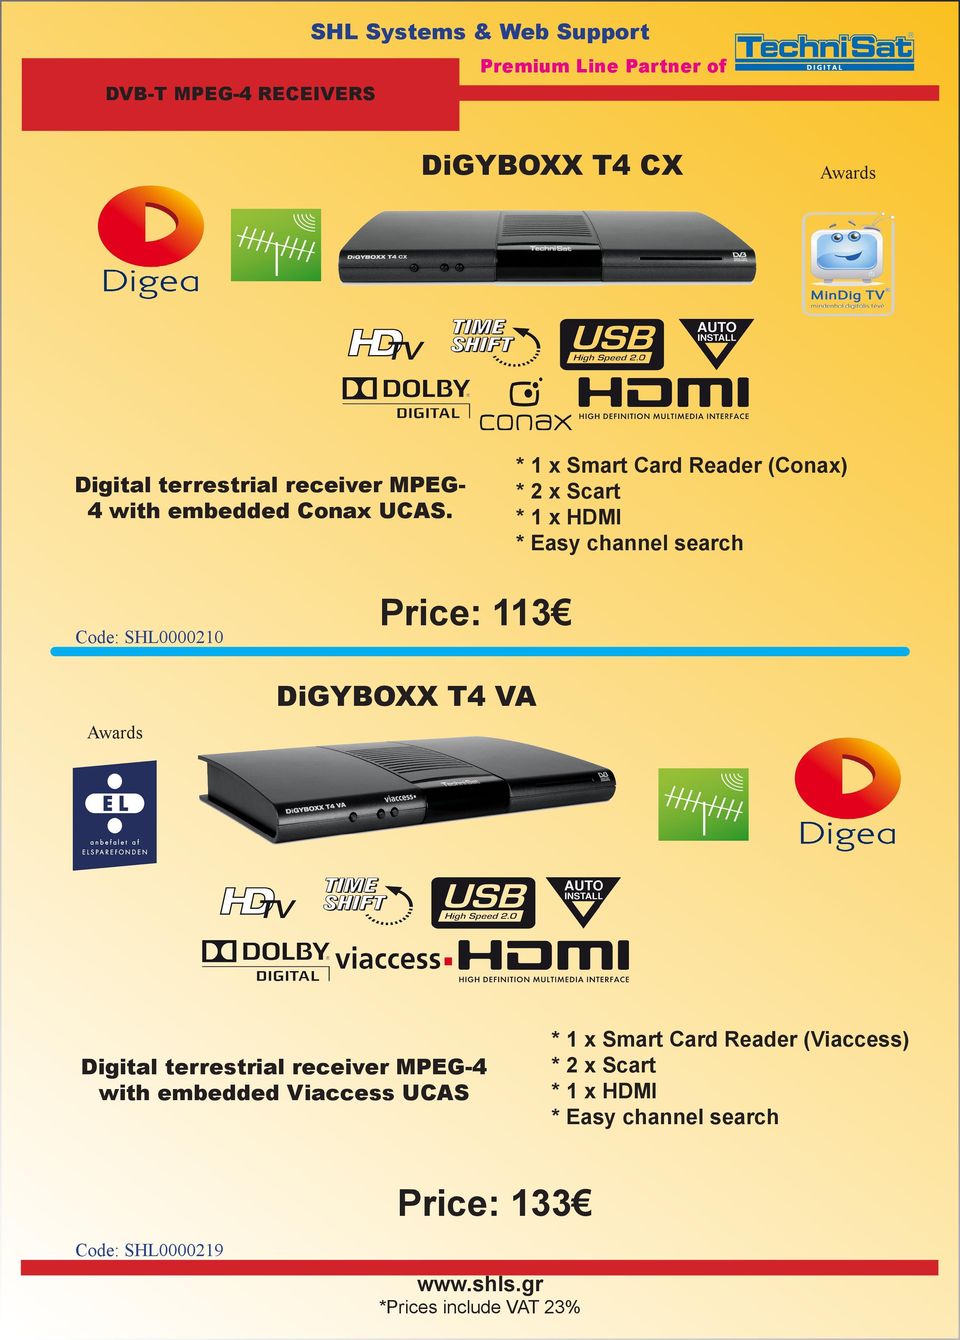 SHL0000210 Price: 113 DiGYBOXX T4 VA Digital terrestrial receiver MPEG-4 with embedded Viaccess